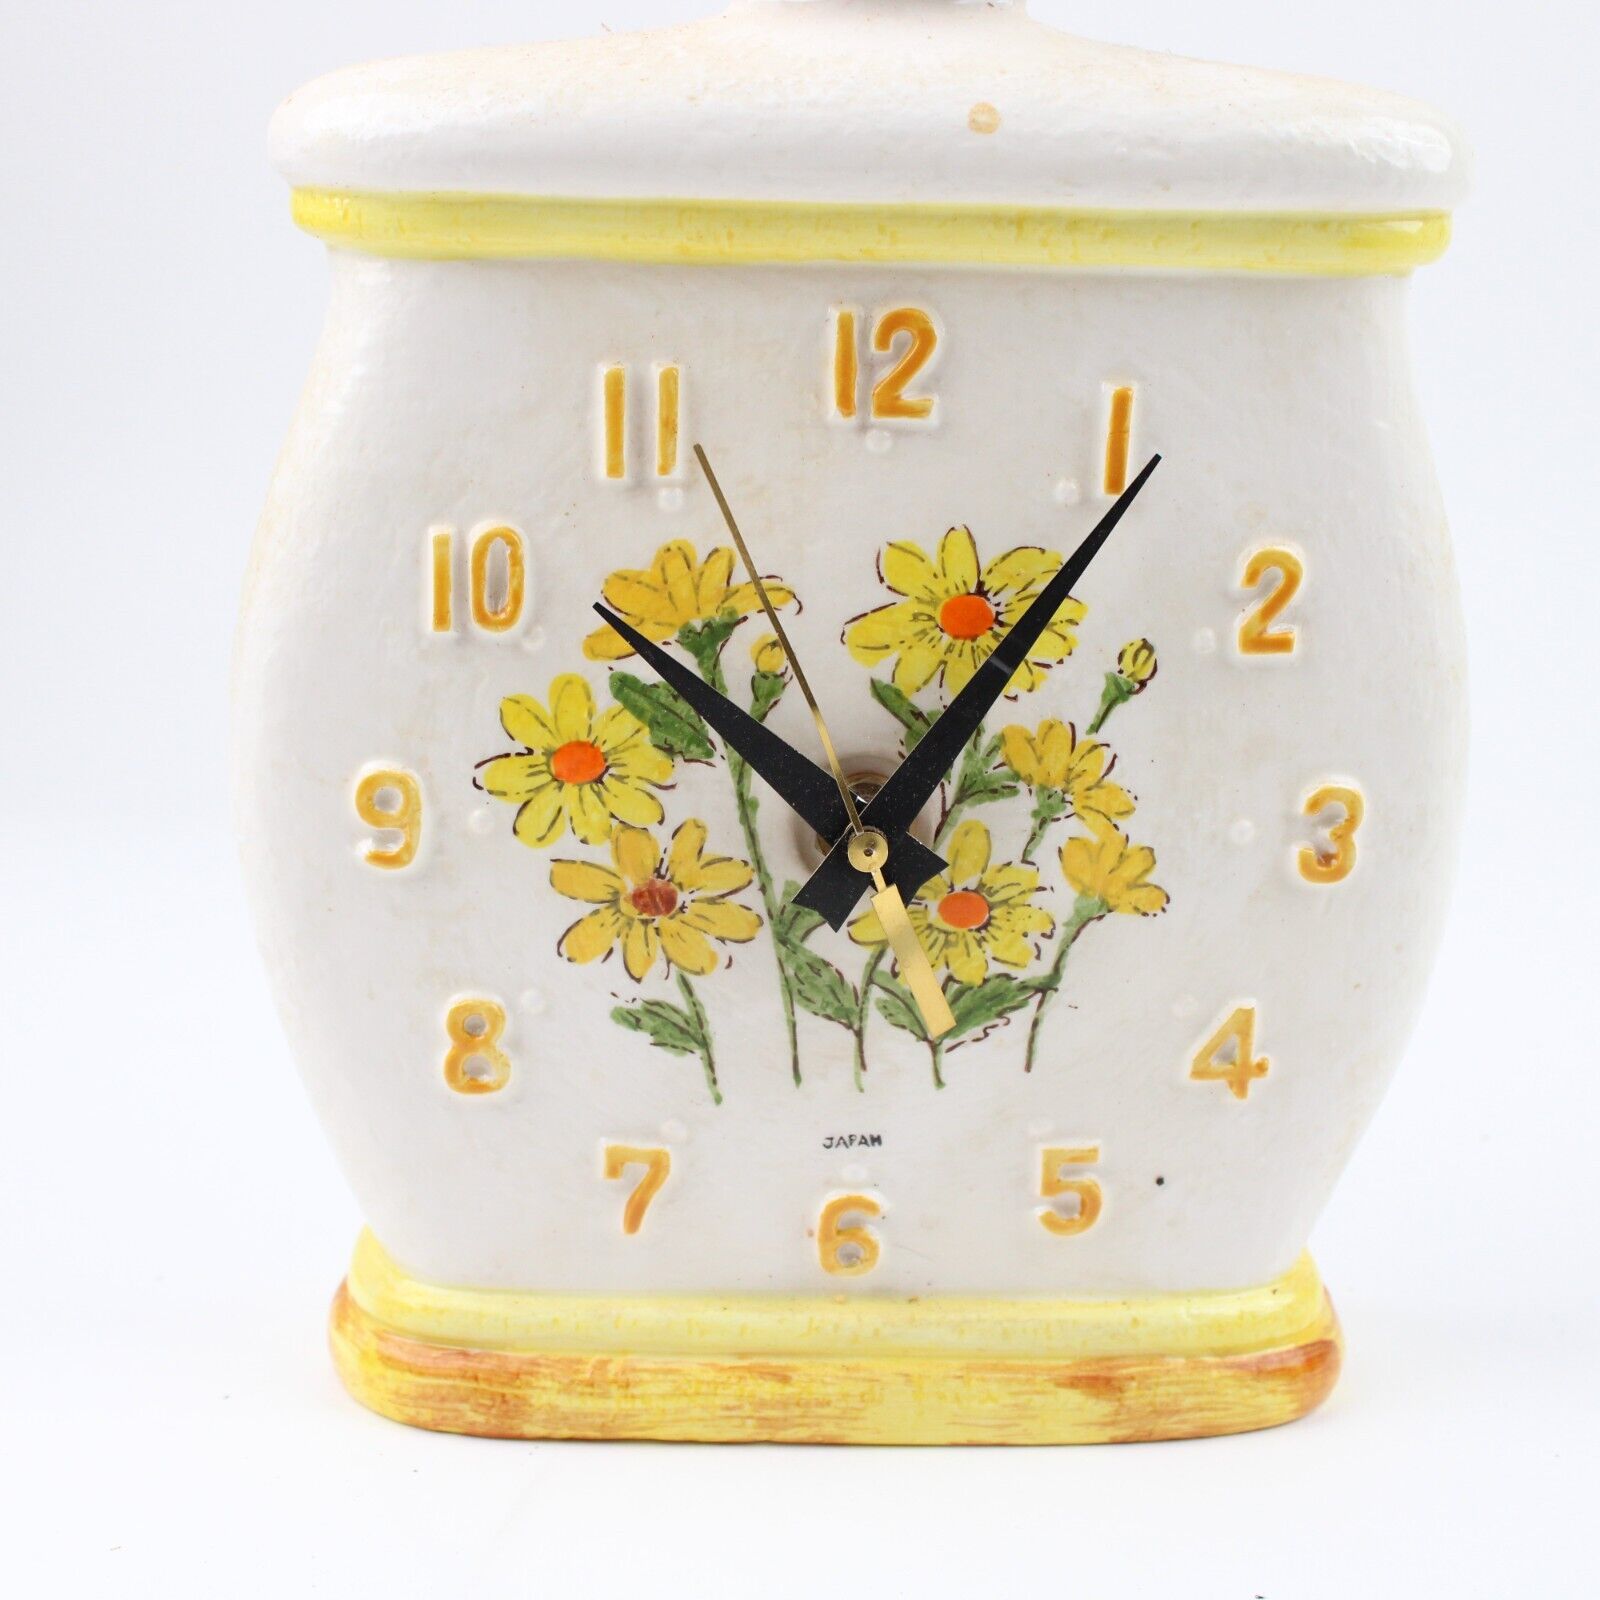 Vintage 1976 Sears Flower Pot Ceramic Wall Clock Battery Operated Working Video